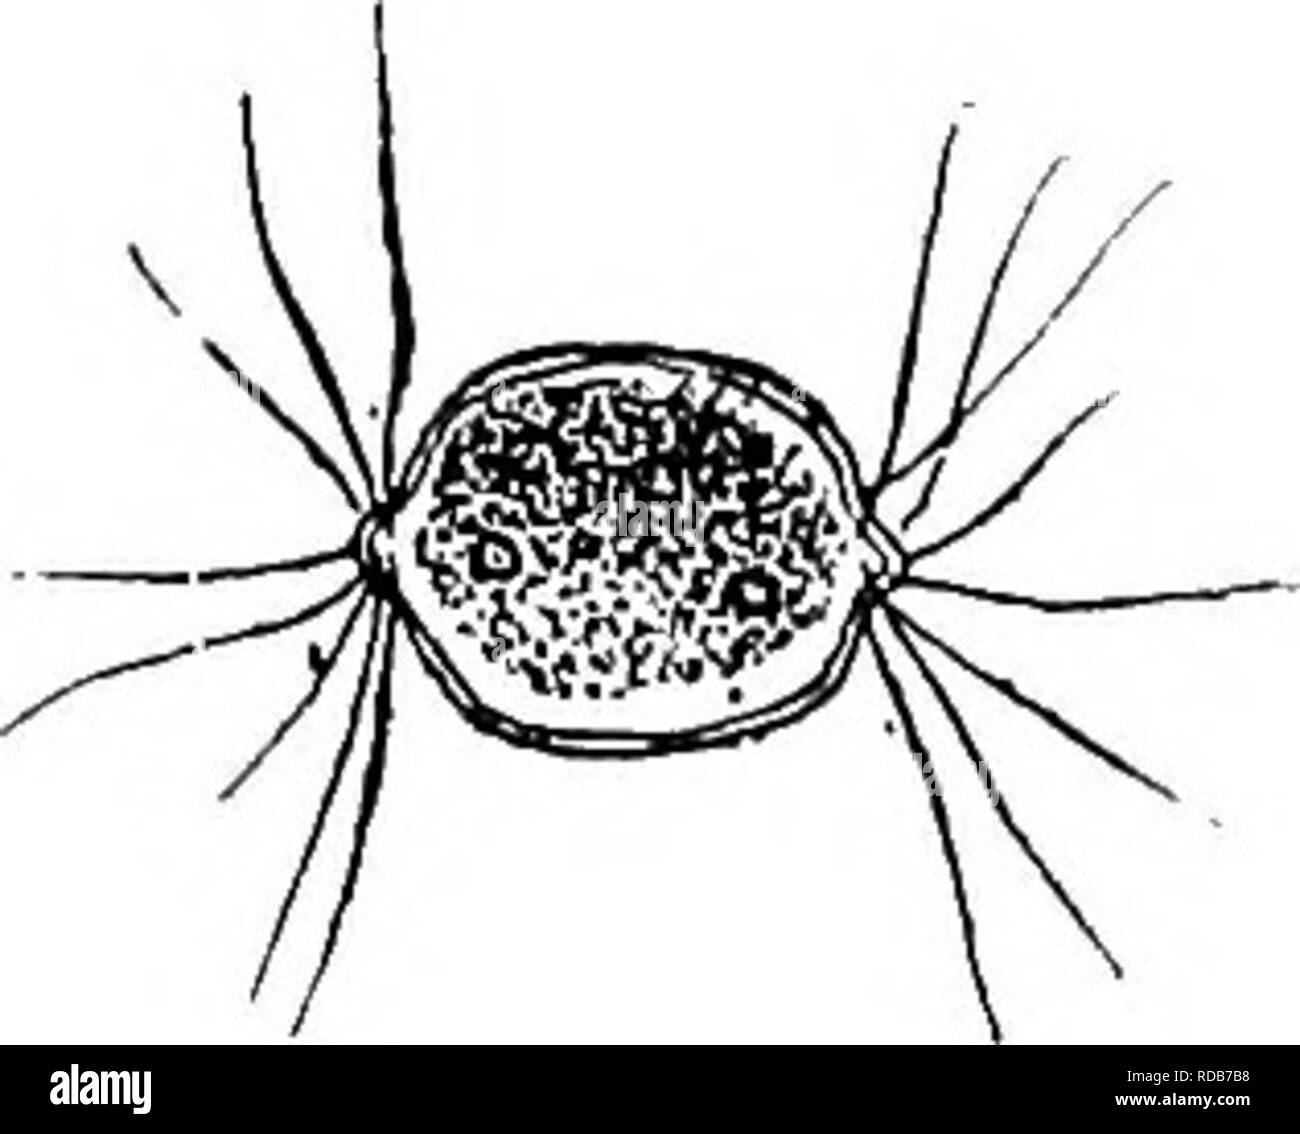 . Fresh-water biology. Freshwater biology. THE FRESH-WATER ALGAE 155. 149 (148, 150) Bristles varying in number, without a basal swelling. Cells single Chodatella Lemmermann. Cells solitary, ellipsoidal; spines evenly distributed over the surface or in circles about the ends. Chromatophore parietal, with or without pyrenoids. Chodatdla is occasionally found in the plankton of larger lakes. Fig. 184. Chodatella citriformis Snow. X Soo. (Original.) 150 (148, 149) Bristles numerous, on the outside of the colony only. Cells usually united into a small cluster by a gelatinous substance. Franceia Le Stock Photo